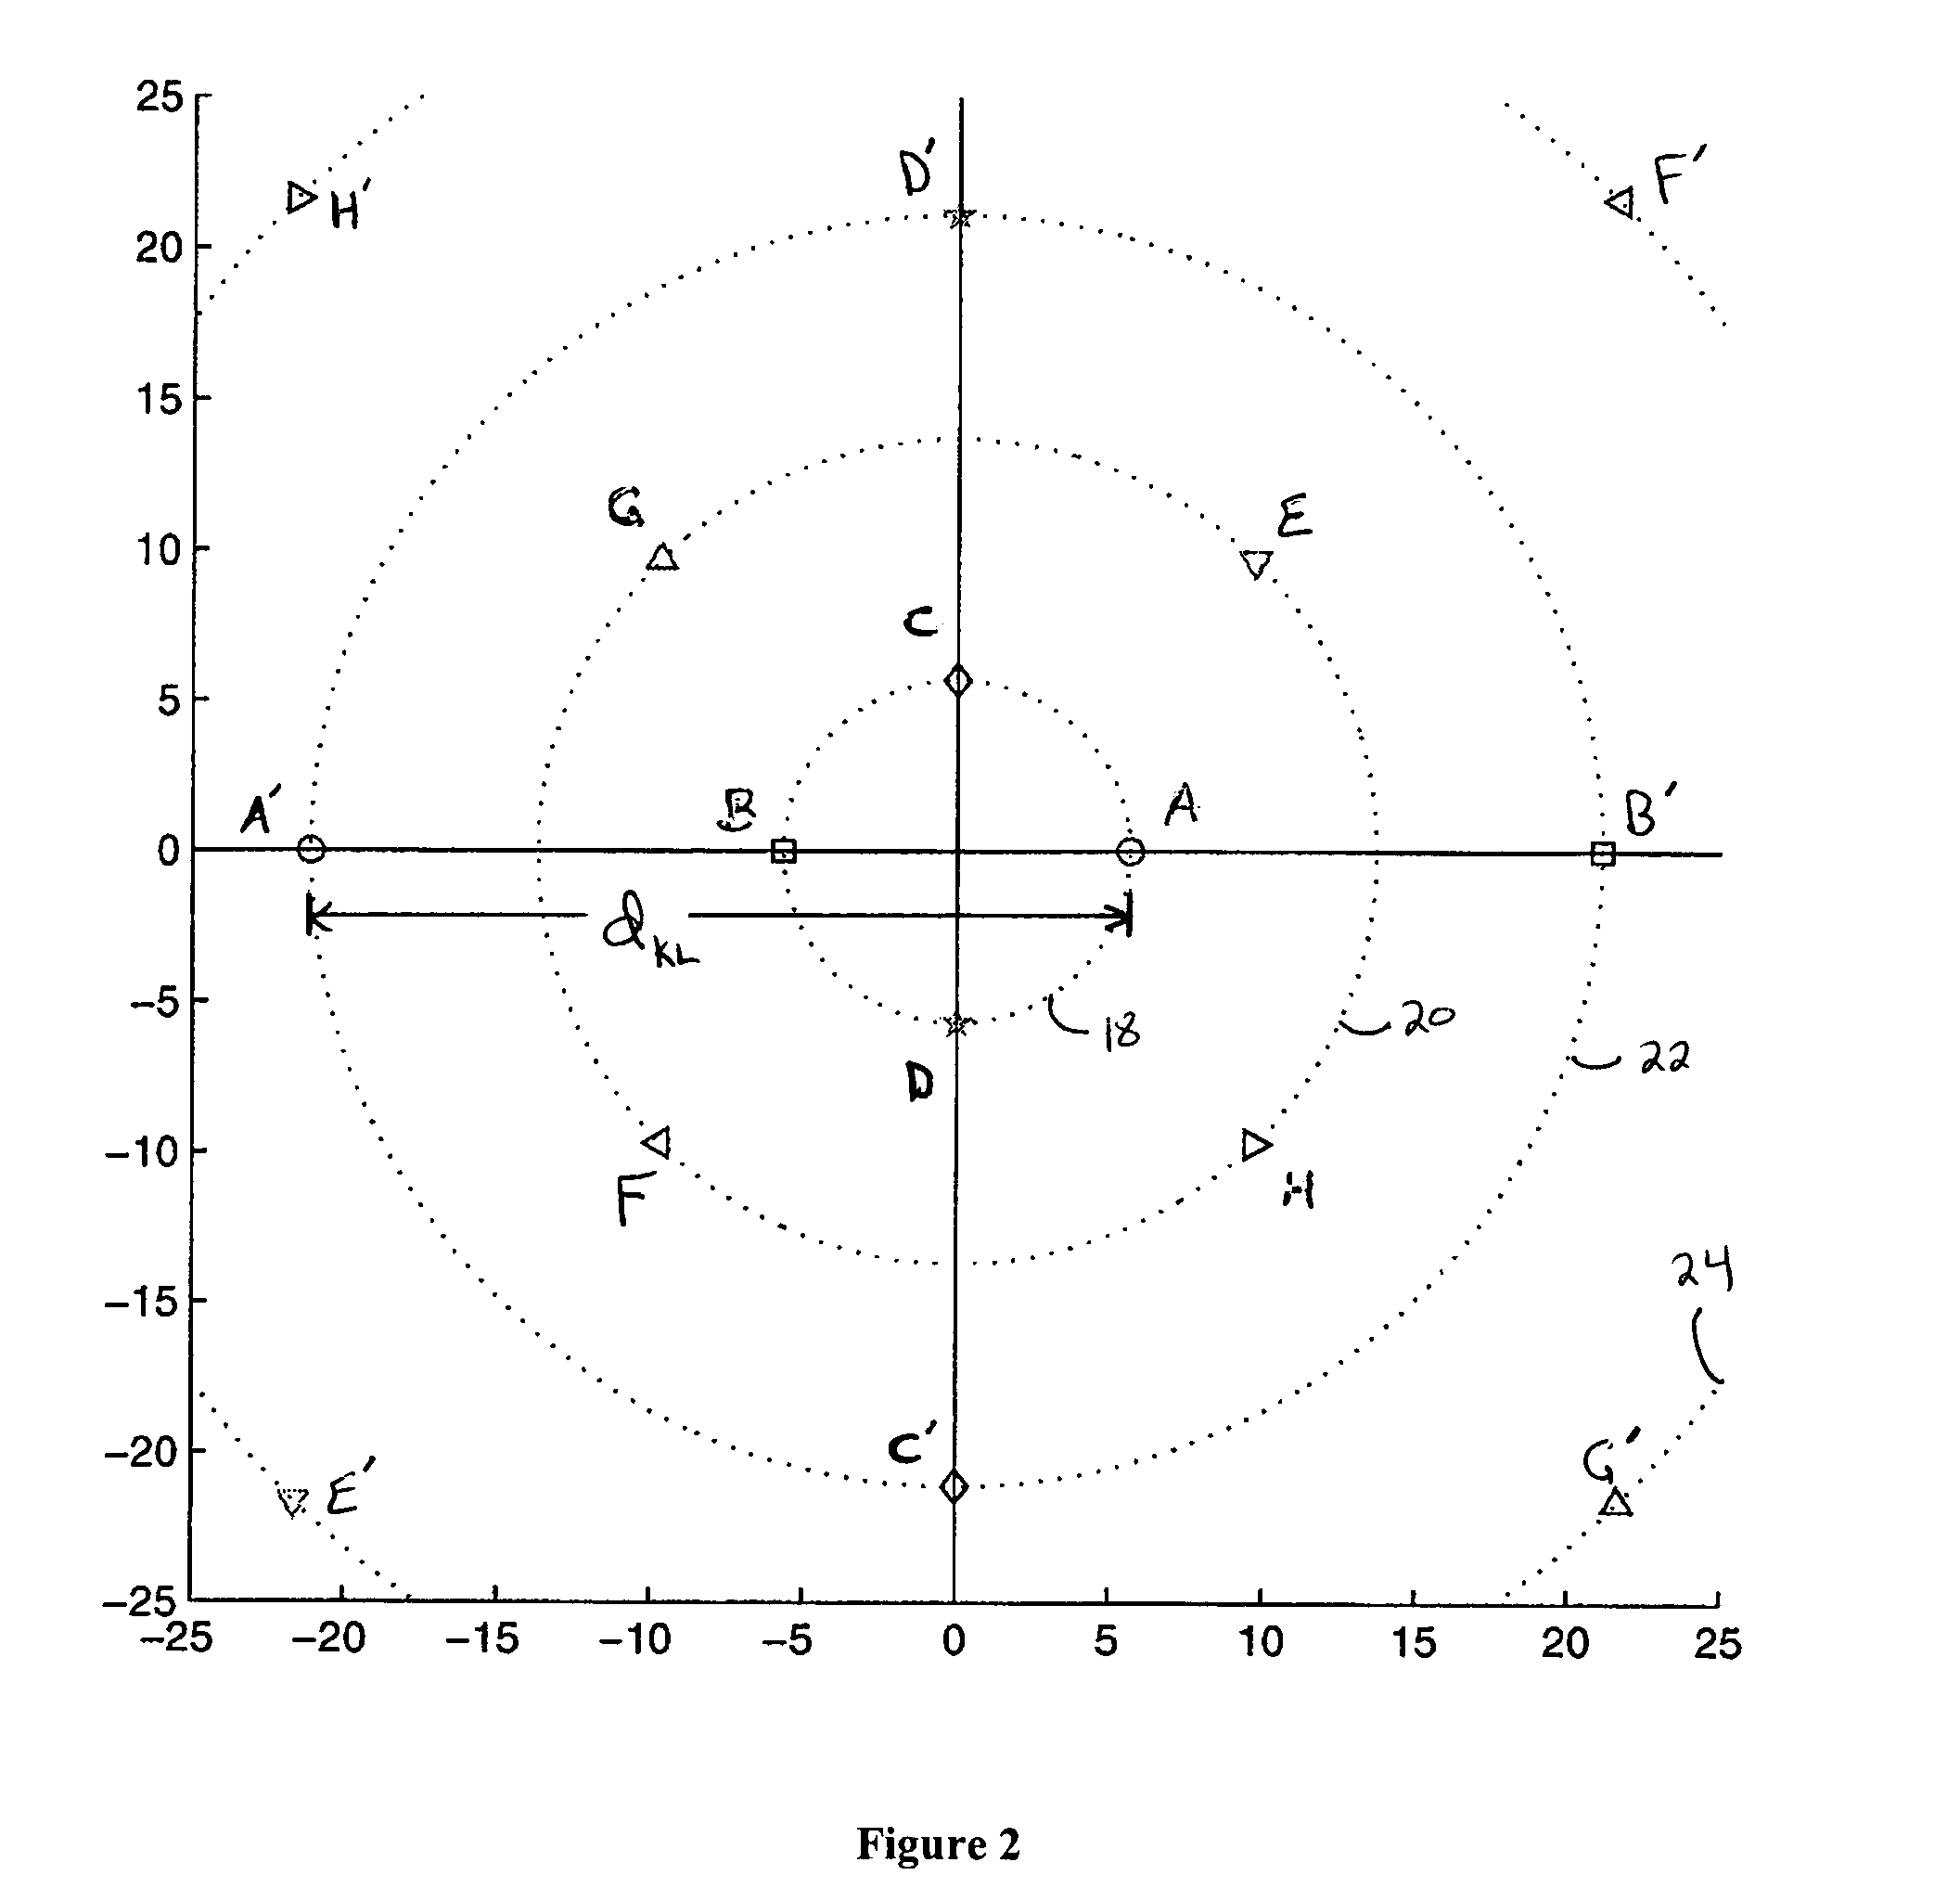 Coded modulation for partially coherent systems